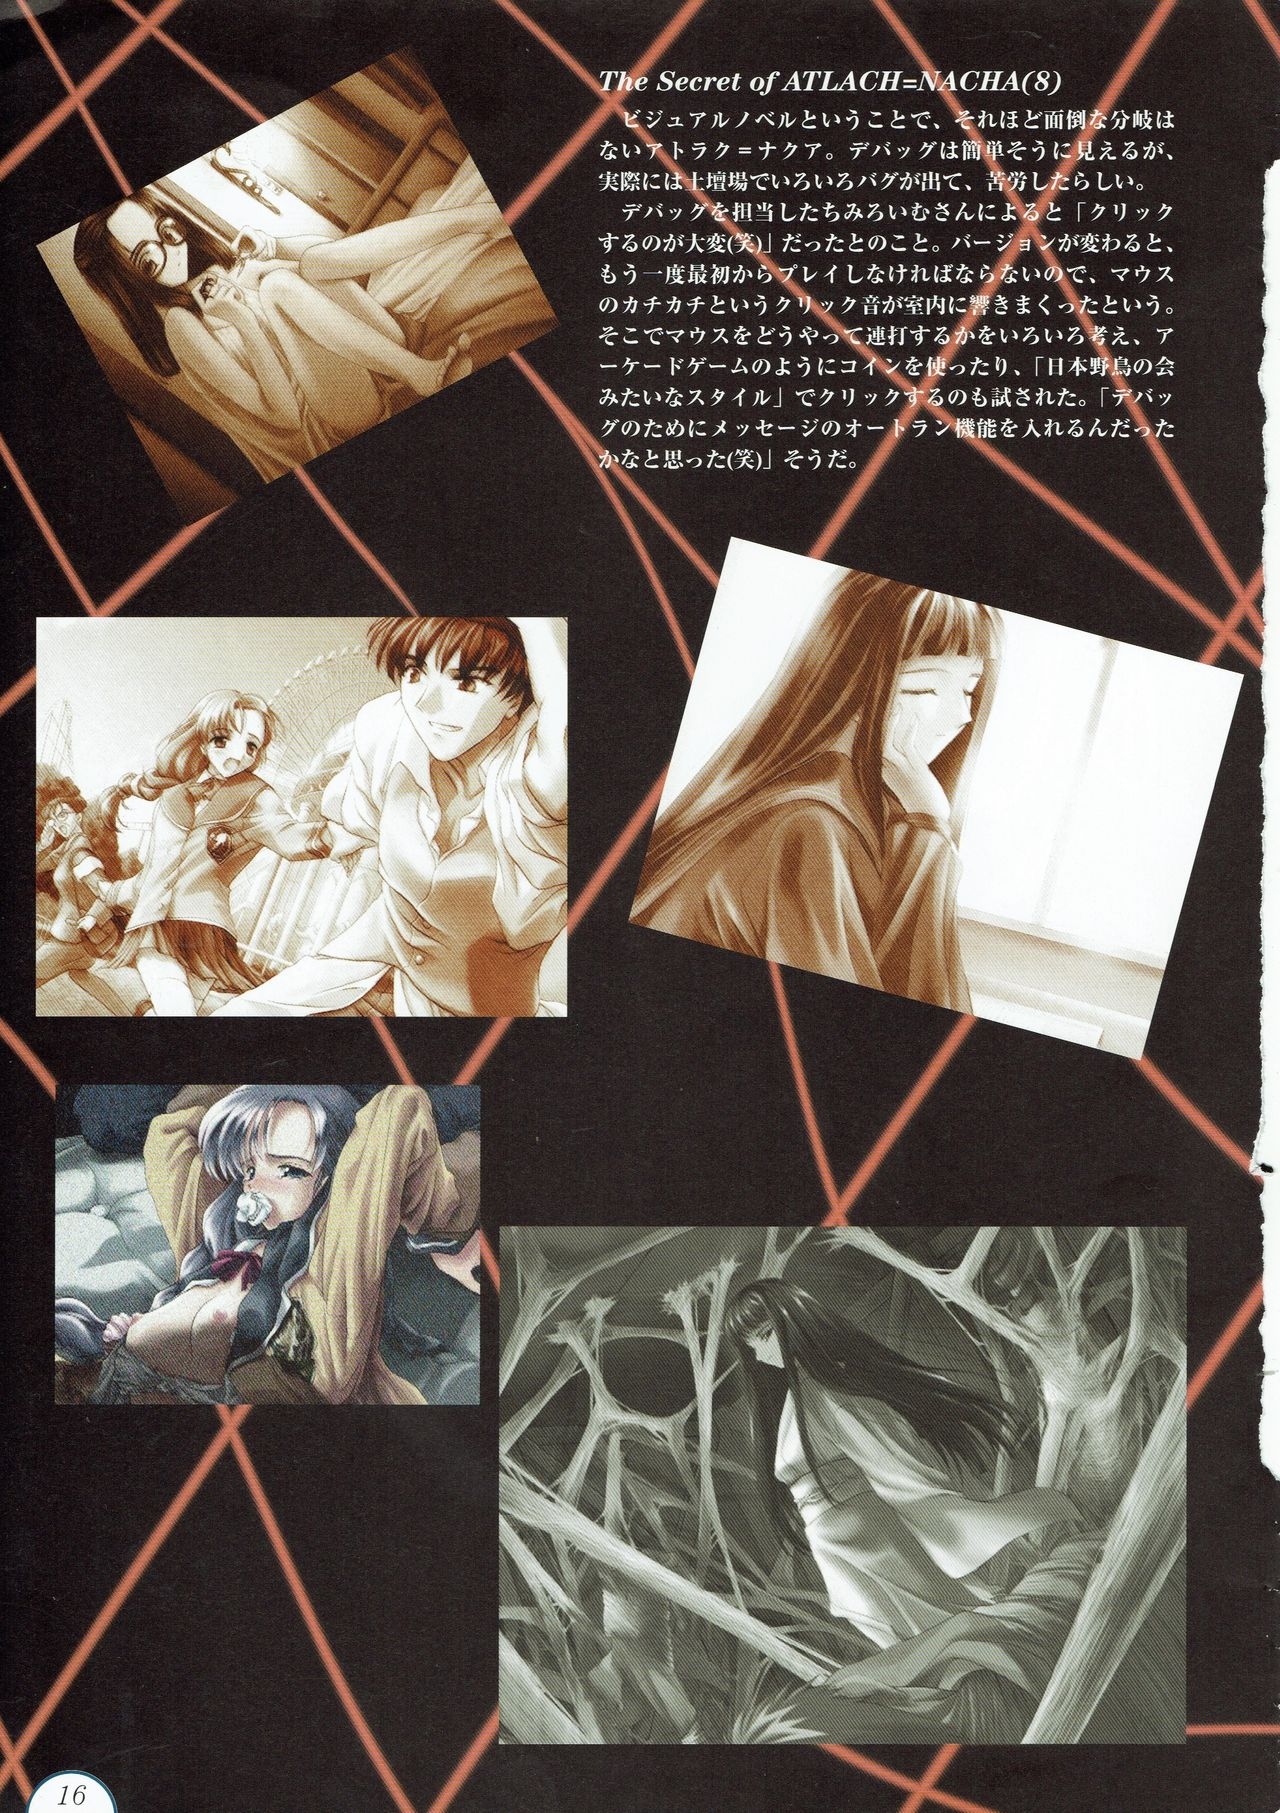 Alice no Yakata 456 Official Guide 17